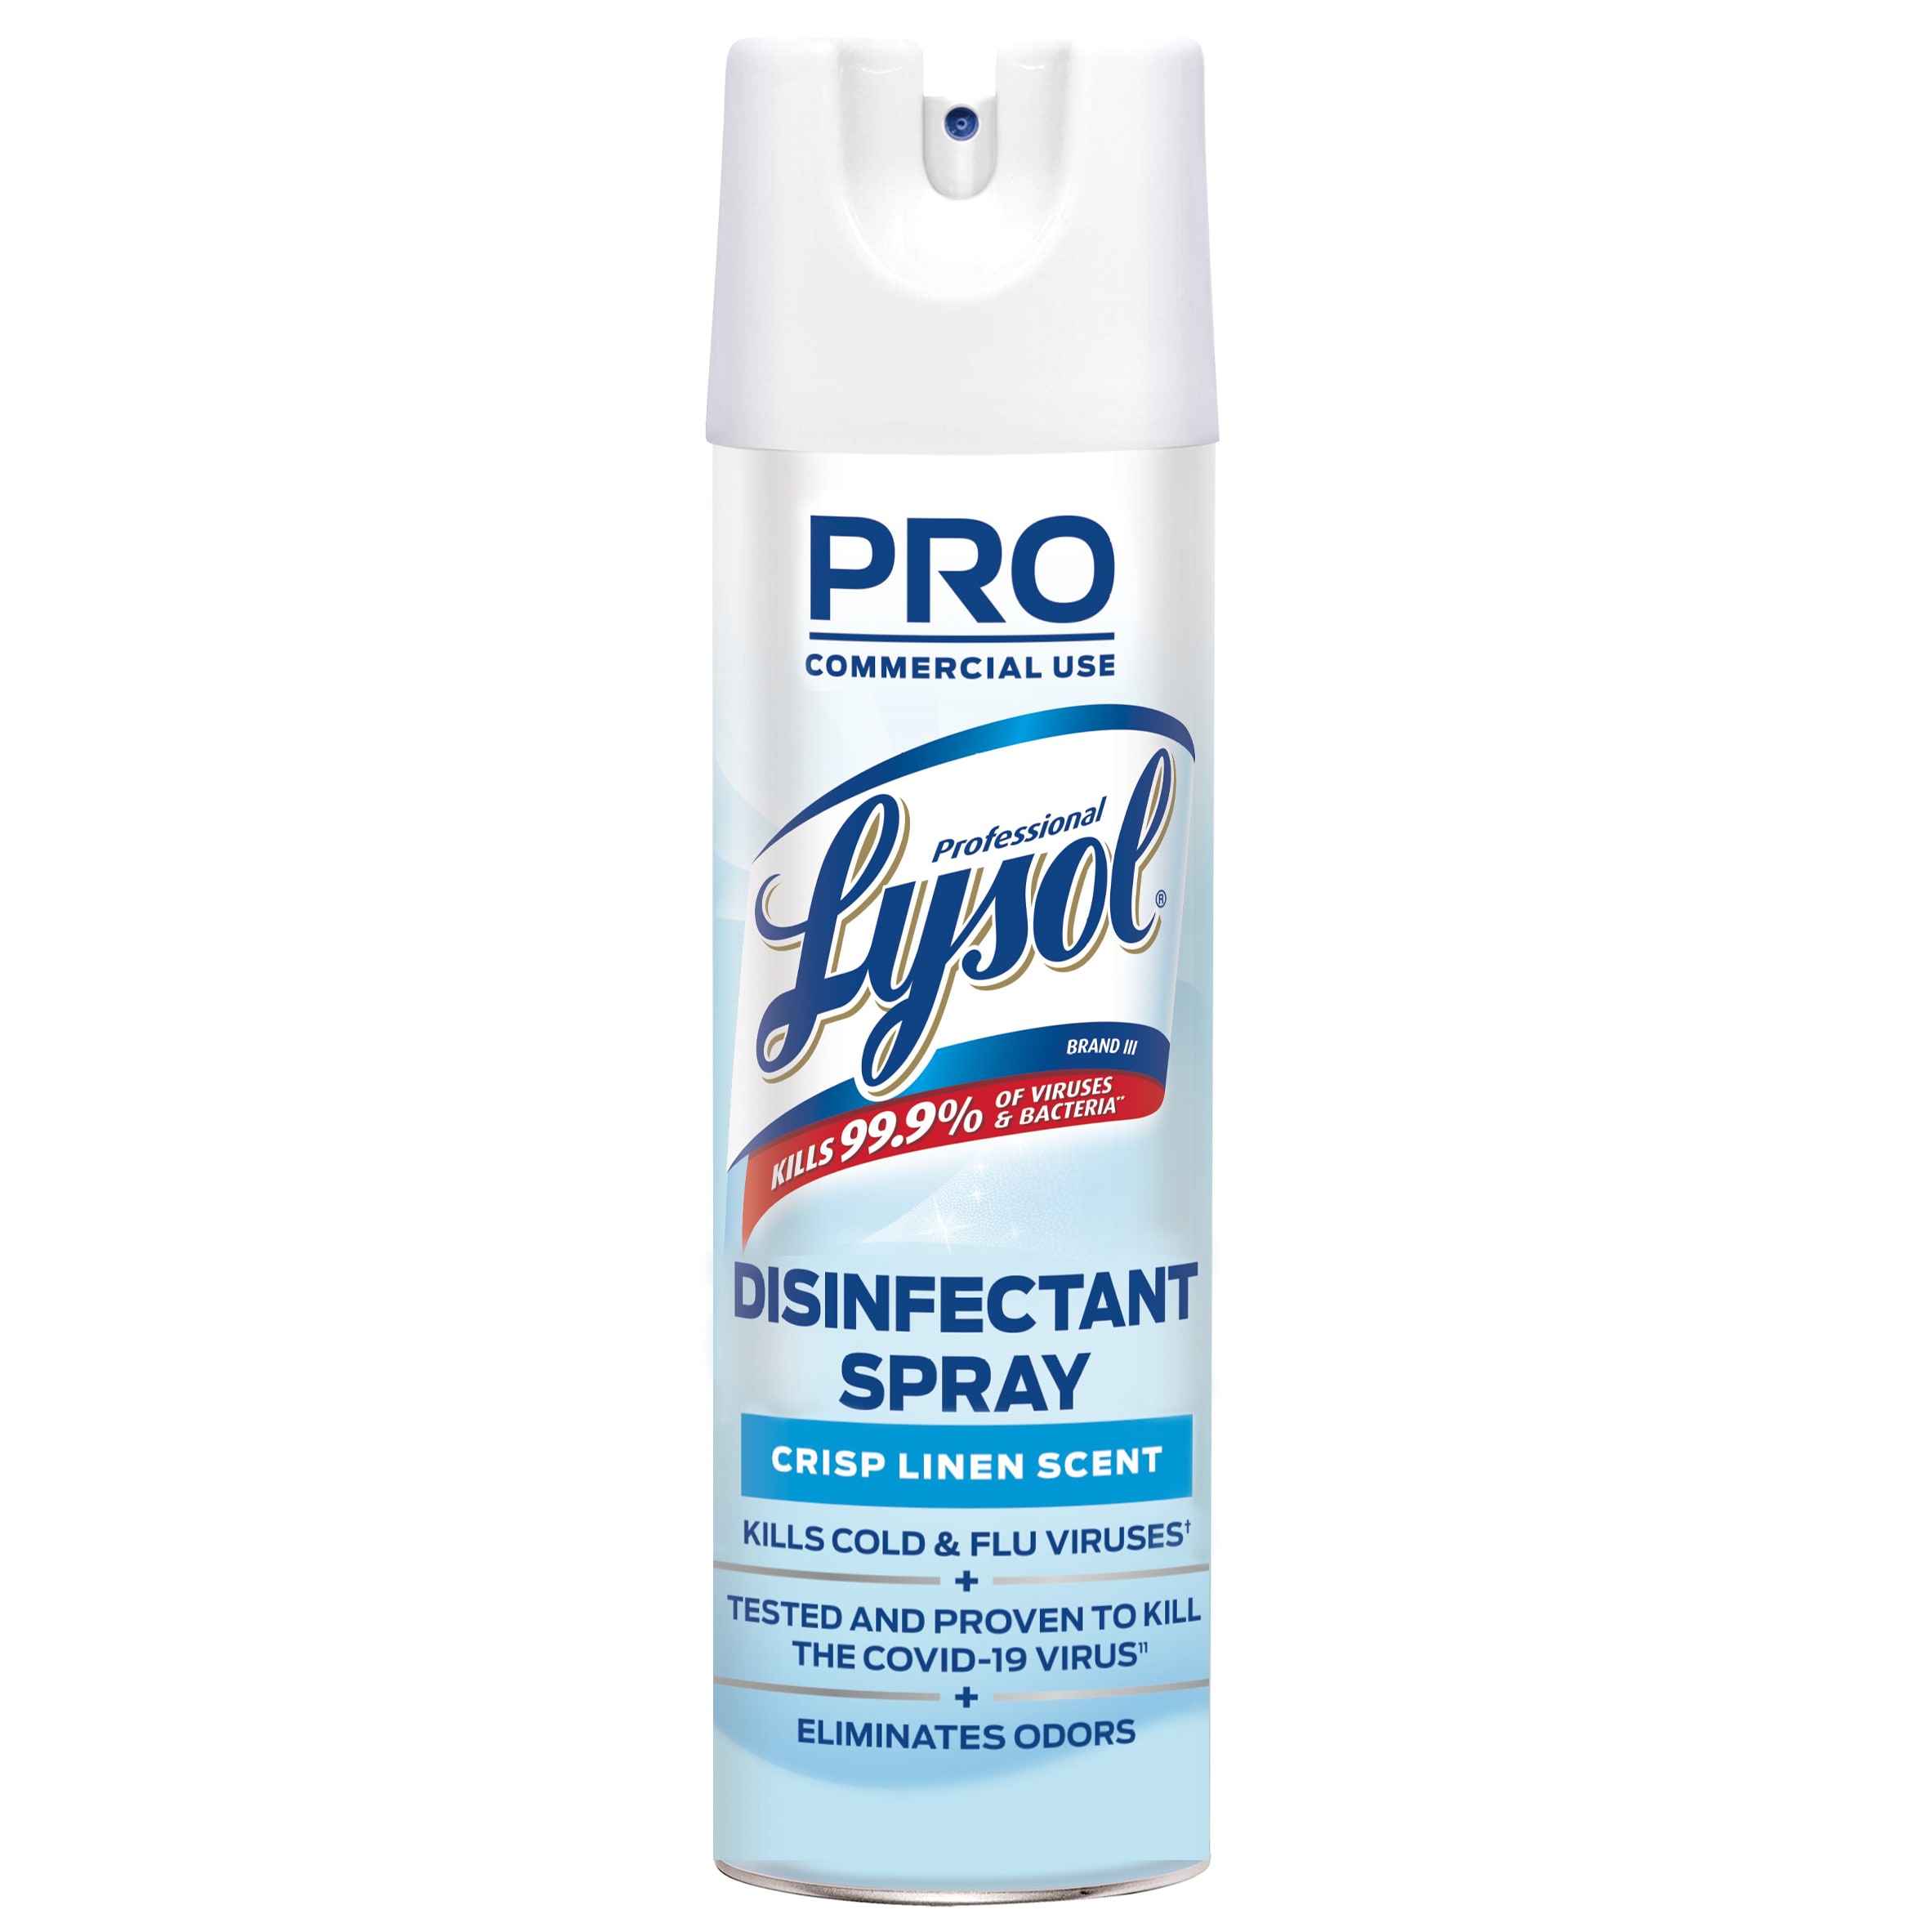 Lysol Professional Disinfectant Heavy Duty Bathroom Cleaner